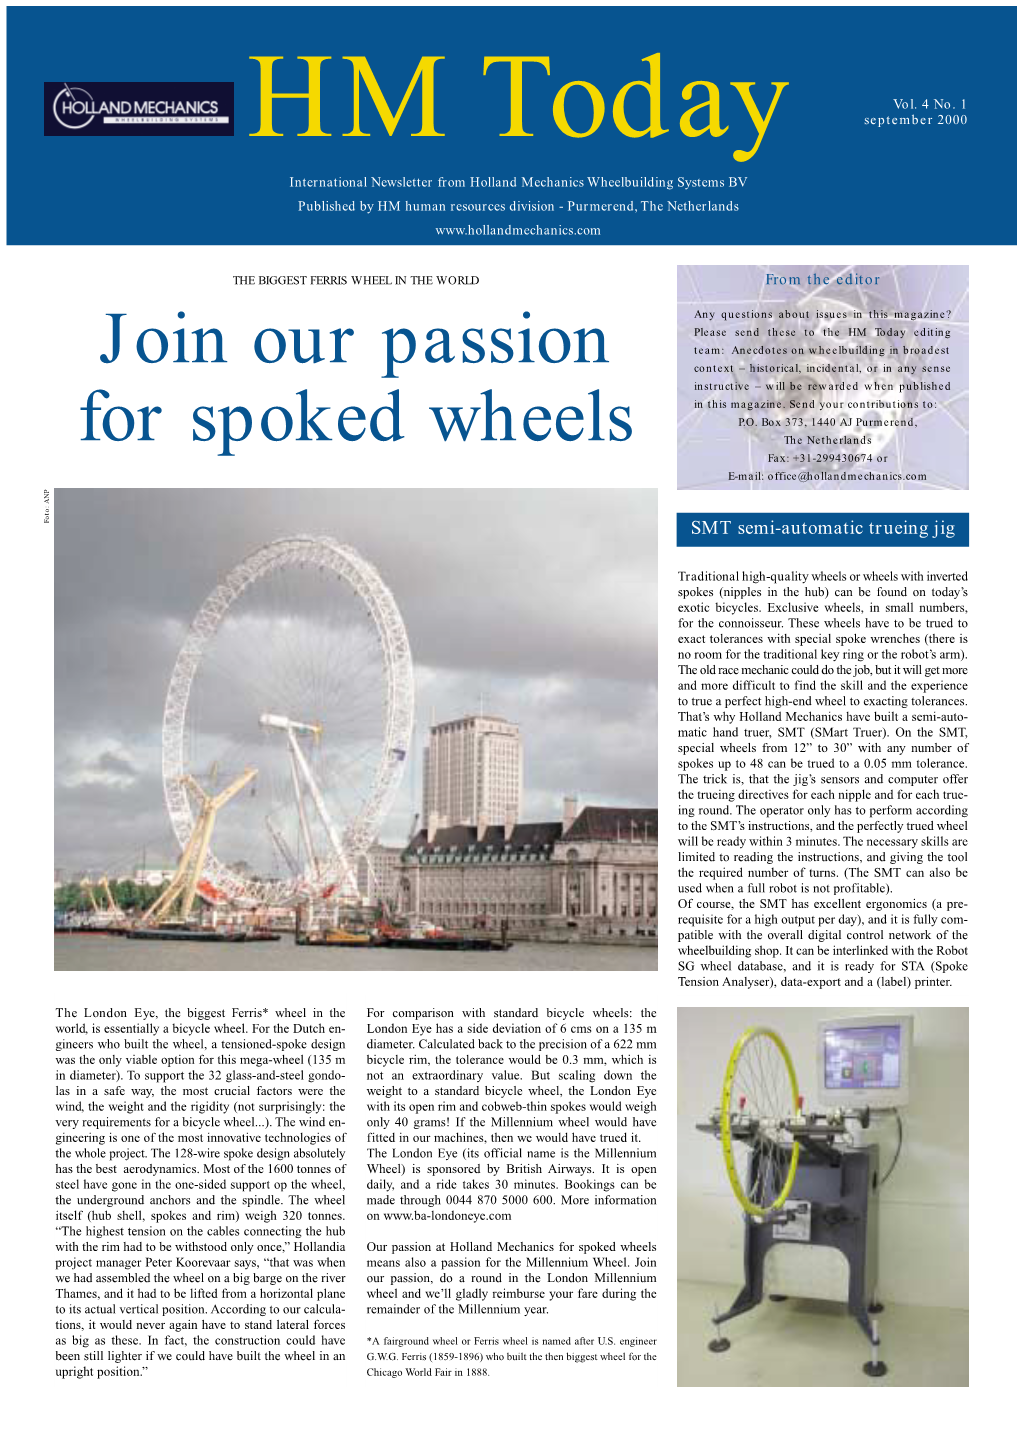 Join Our Passion for Spoked Wheels